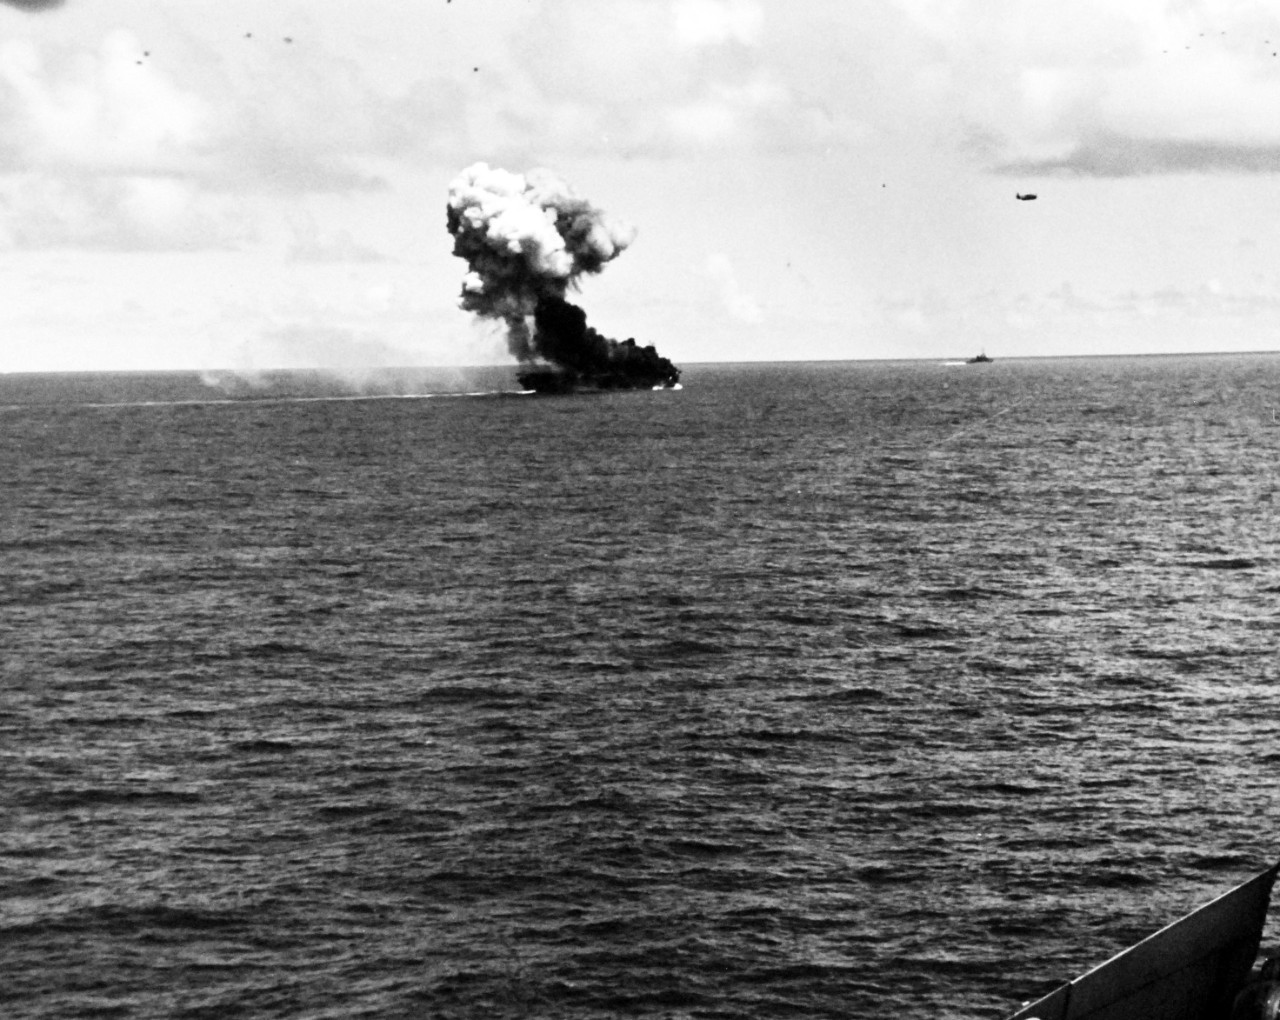 80-G-270619:  USS Suwannee (CVE-27), October 26, 1944.   Fires and explosion on the flight deck of USS Suwannee (CVE-27), resulting from a suicide hit of a Japanese “Zero” near Leyte, Philippines.   The airborne plane is friendly.   Taken from USS Sangamon (CVE-26) at Leyte, Philippines.  Official U.S. Navy photograph, now in the collections of the National Archives.  